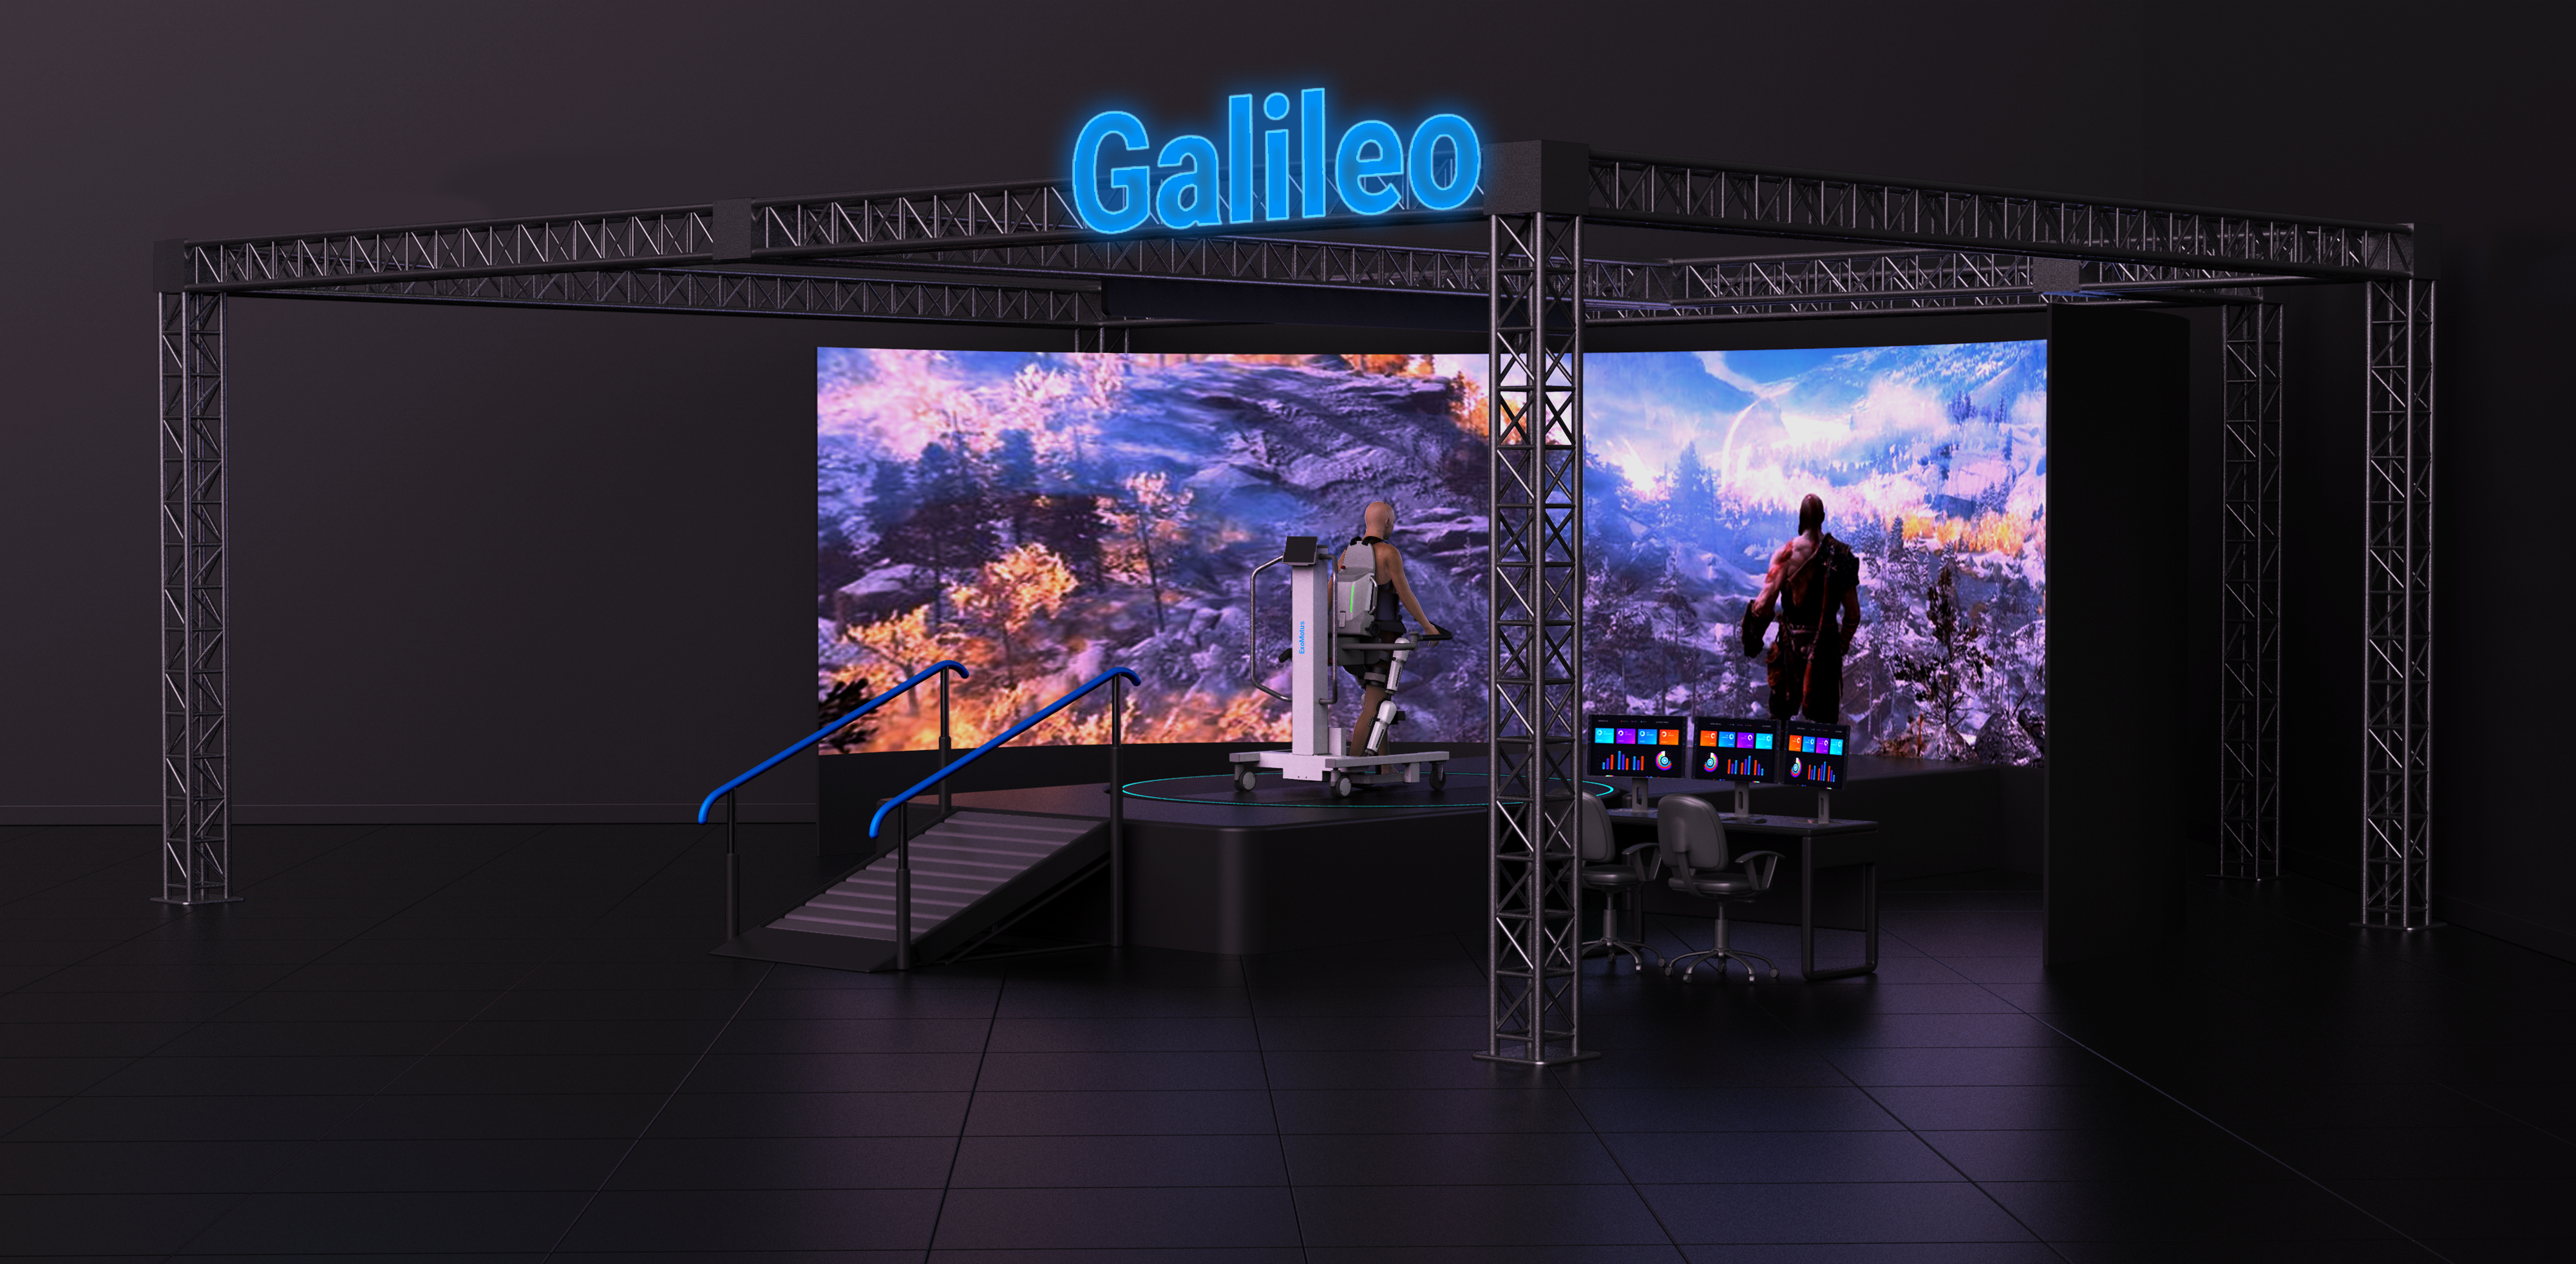 <b>Picture 4:</b> The Galileo system aims to be the most advanced rehabilitation system by integrating 6 DoF motion platform and 6-component force plates.  